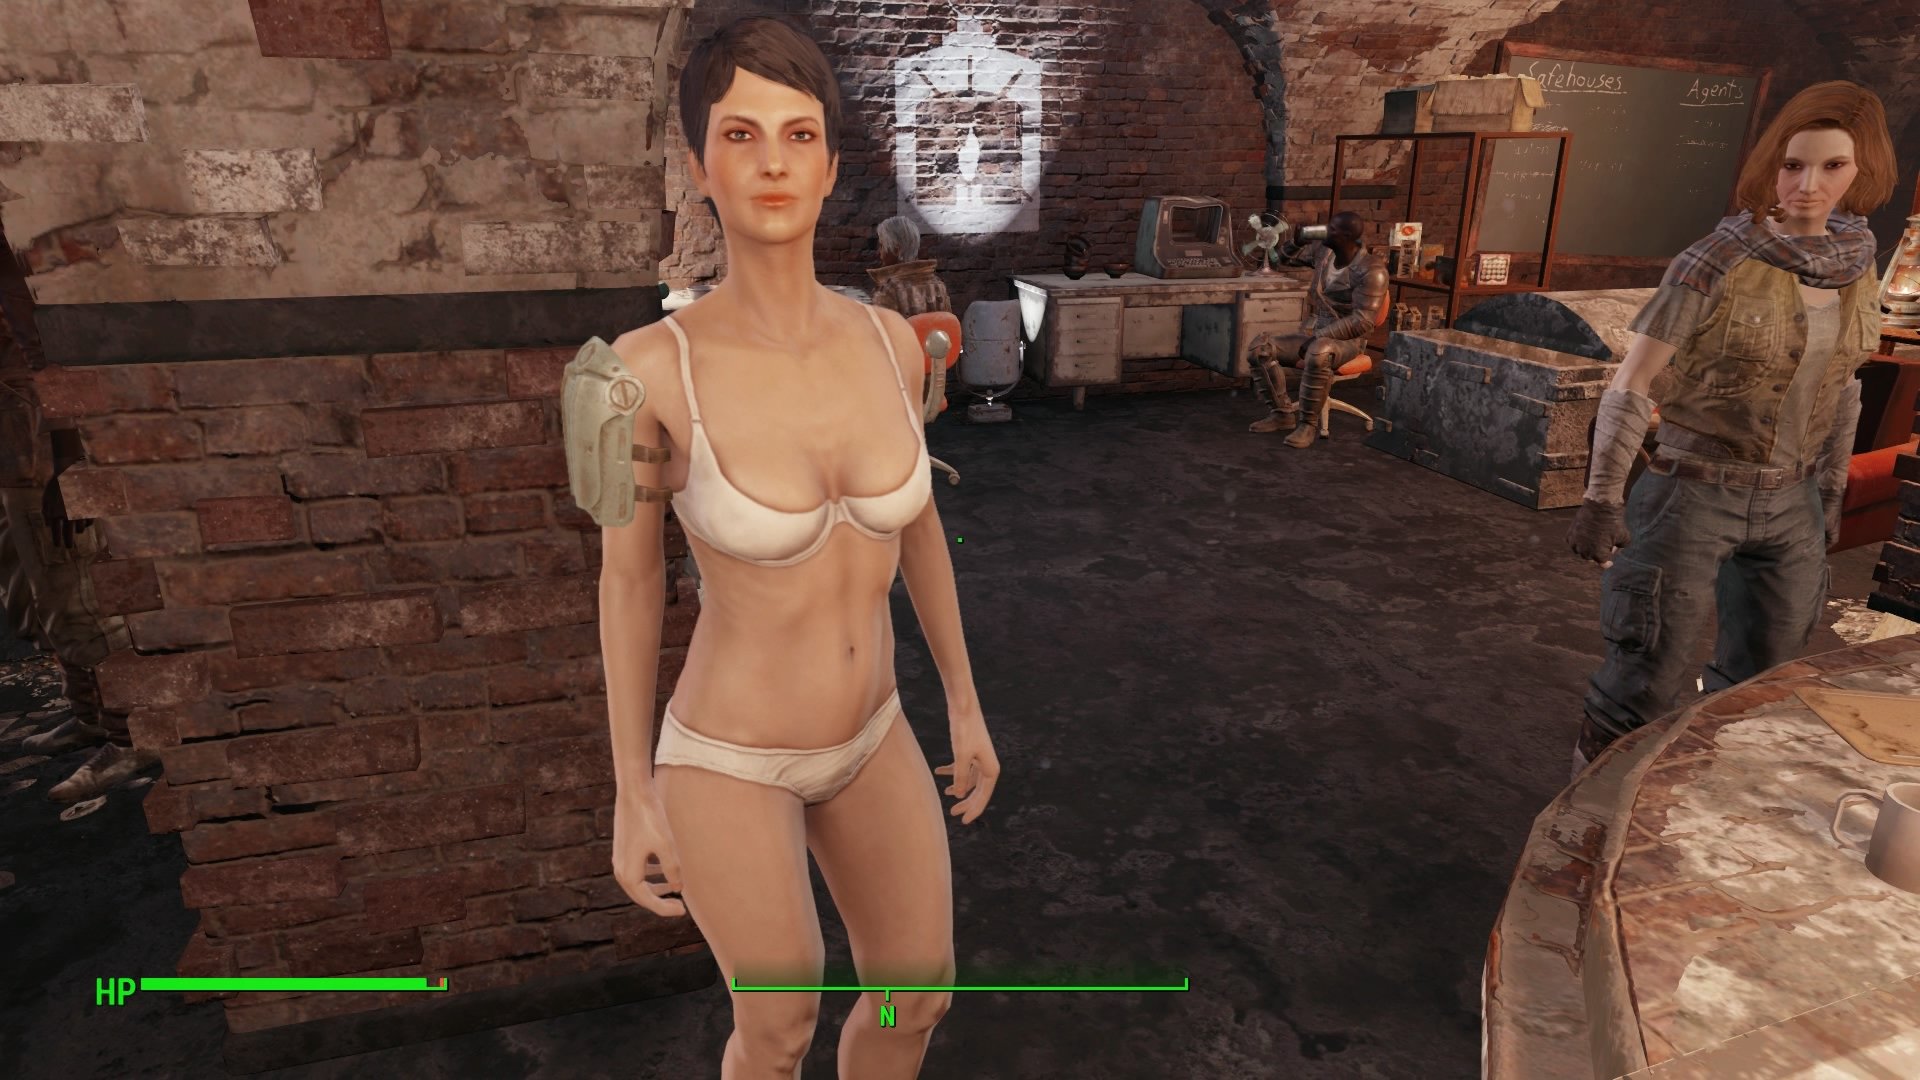 Immersive facial animations fallout 4 фото 92